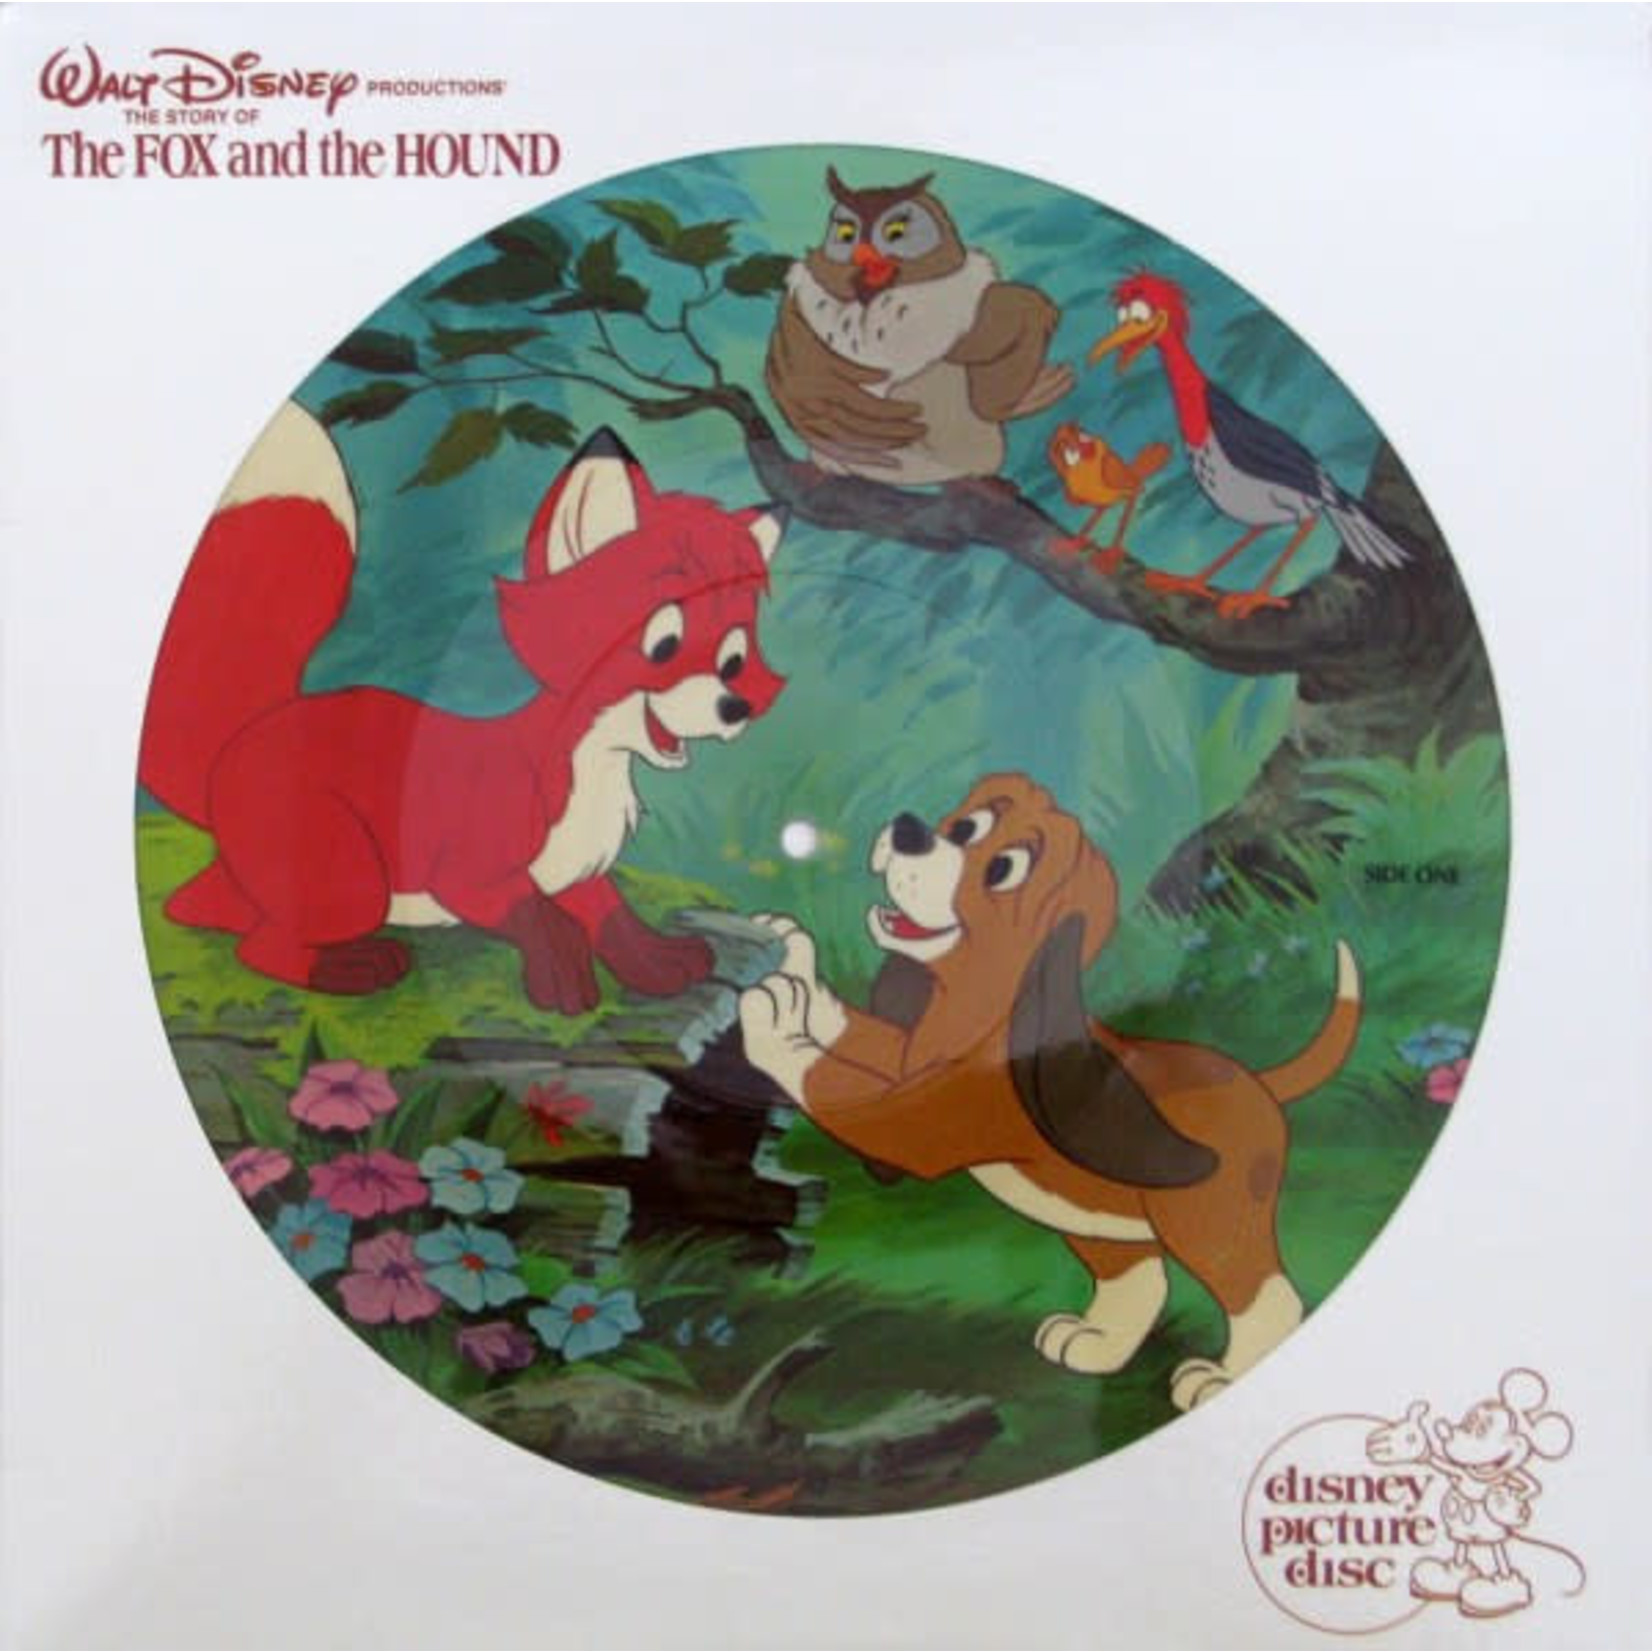 Disney Walt Disney Productions: The story of The Fox And The Hound [Picture Disc](VG)